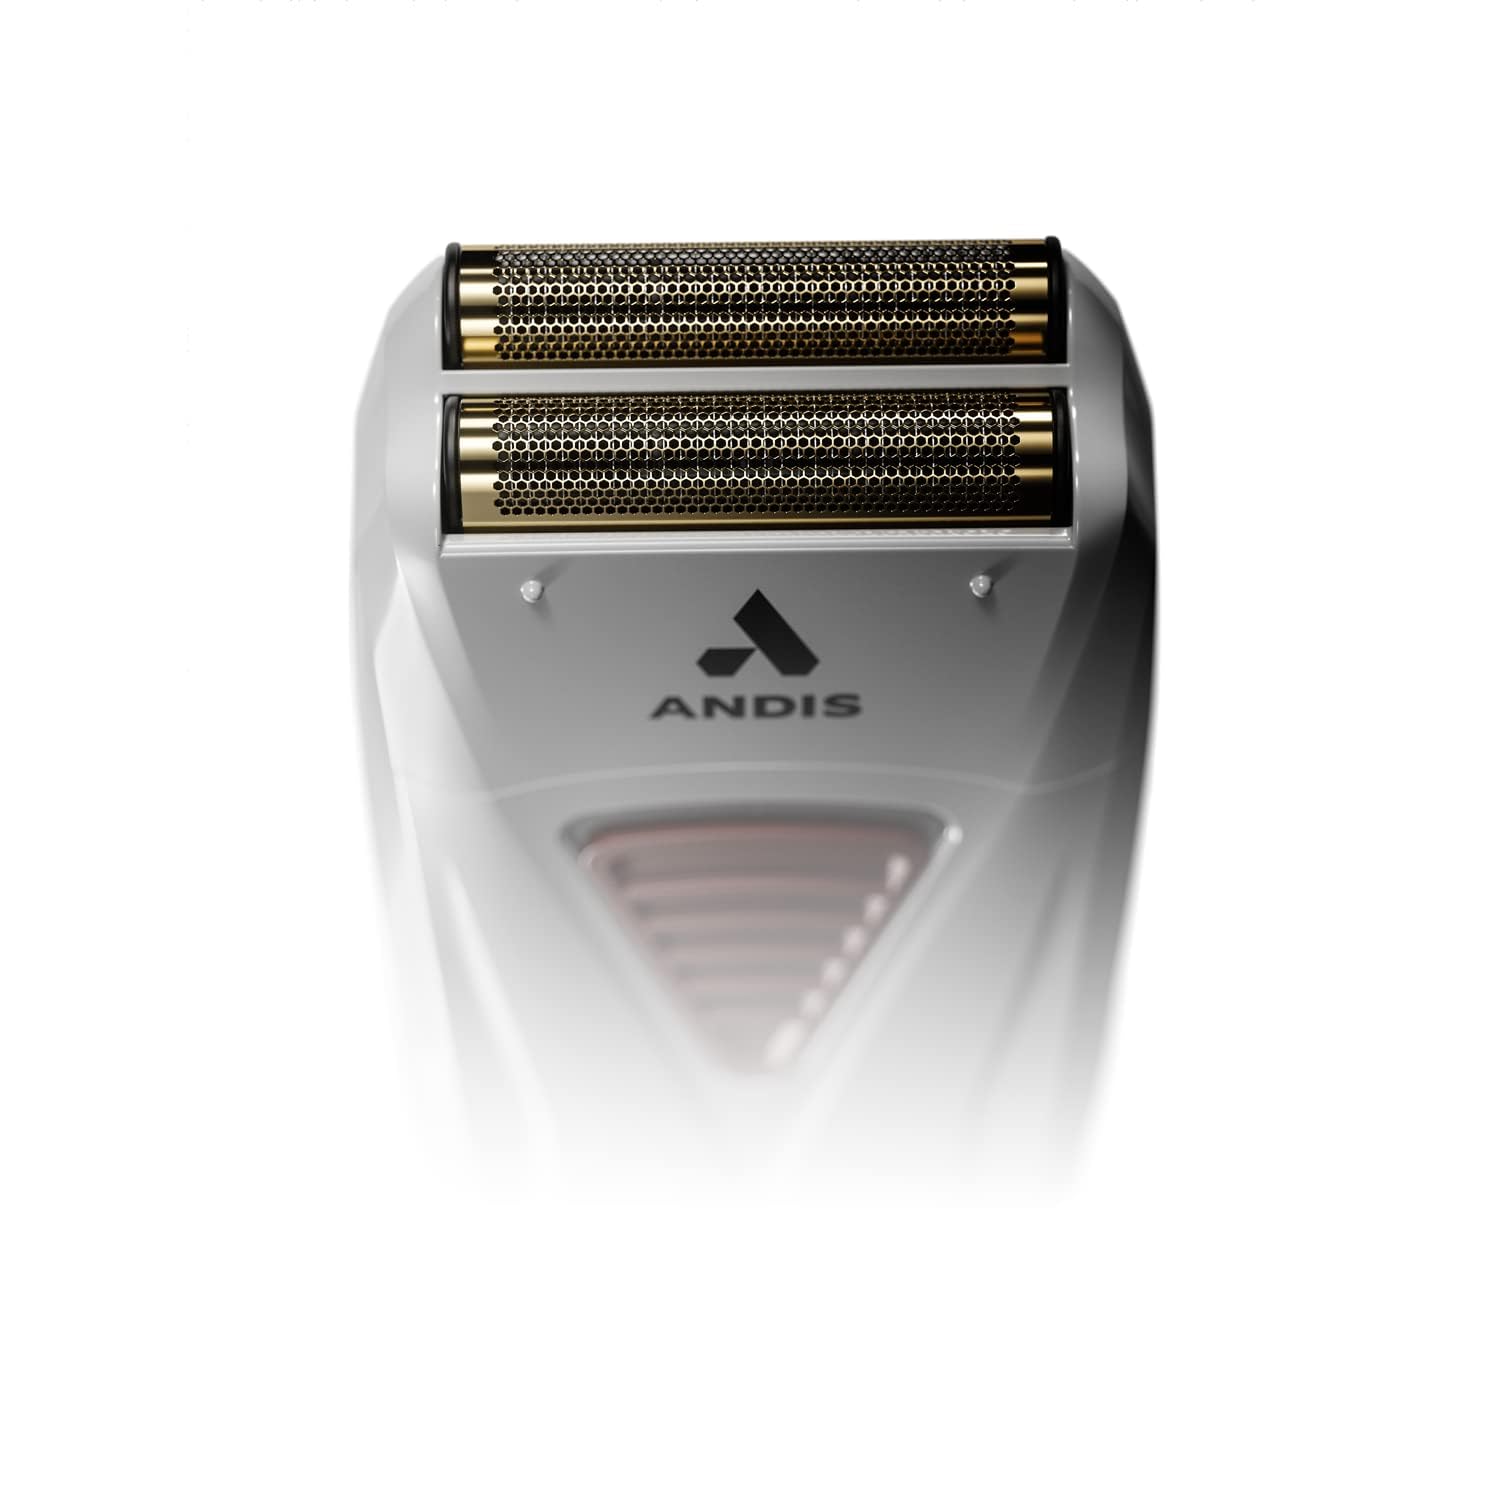 Andis 17235 Pro Lithium Titanium Foil Cord/Cordless Shaver with USB Charger - Pro-Distributing